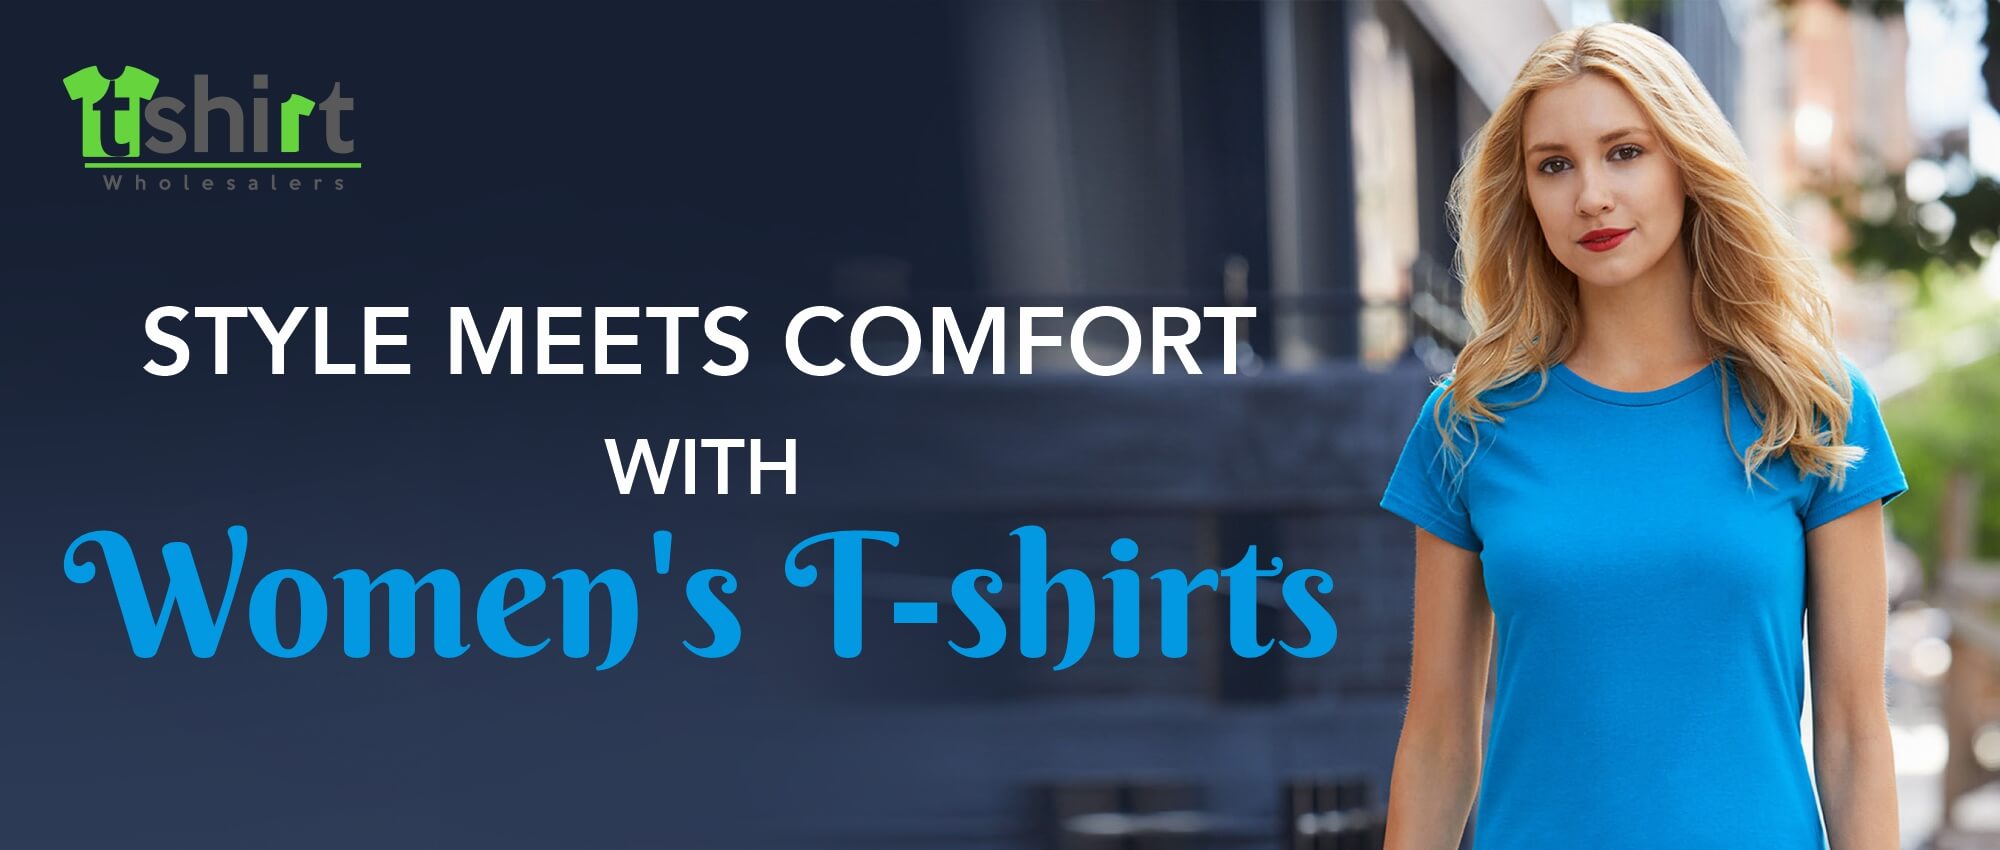 STYLE MEETS COMFORT WITH WOMEN'S T-SHIRTS